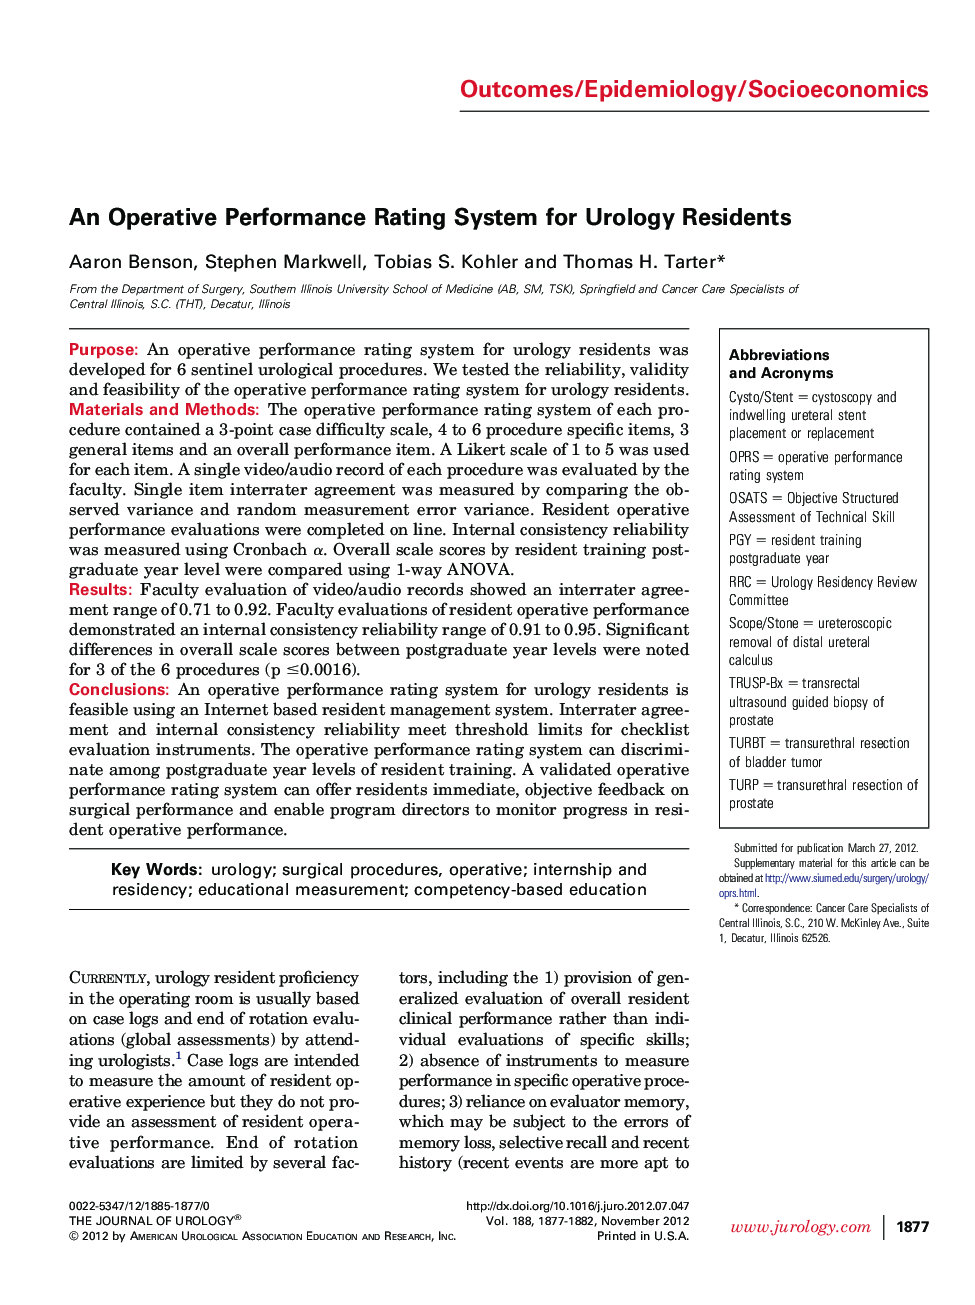 An Operative Performance Rating System for Urology Residents 